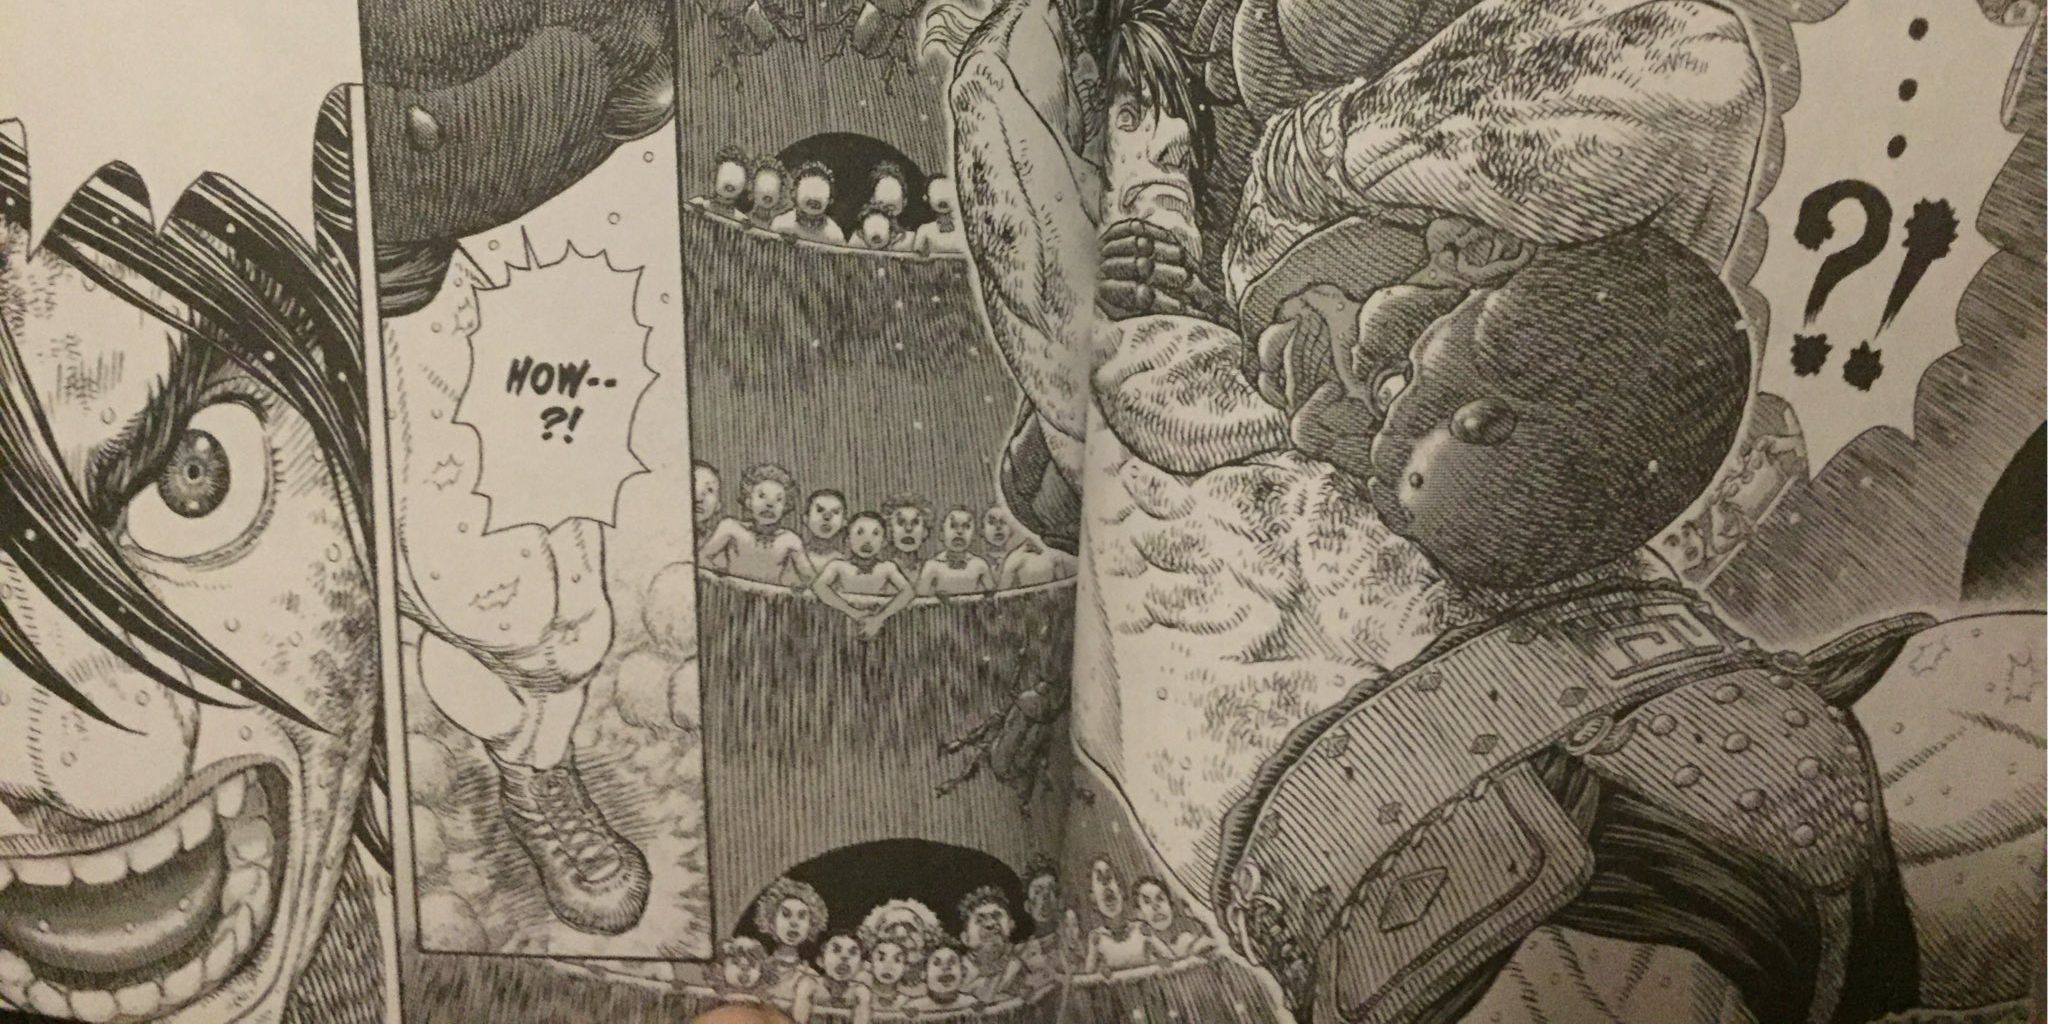 Goliath and bug battle breaks out in Gigantio Maxima Manga